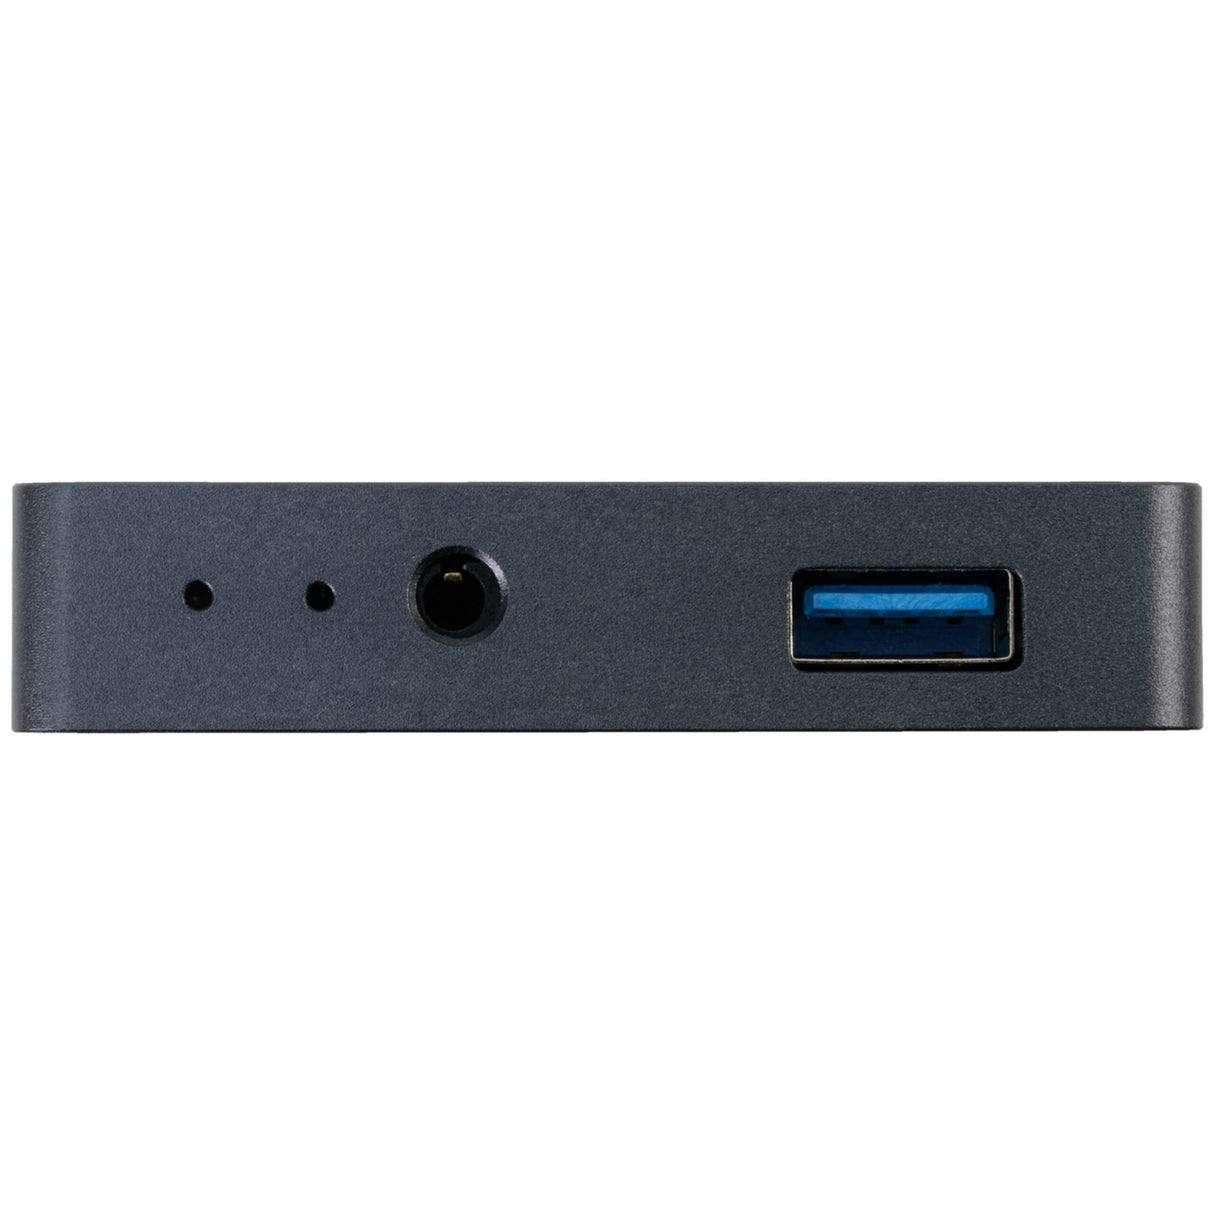 DigitaLinx DL-HD2USB-CAP TeamUp+ Series HDMI to USB Capture Device with Loop Out